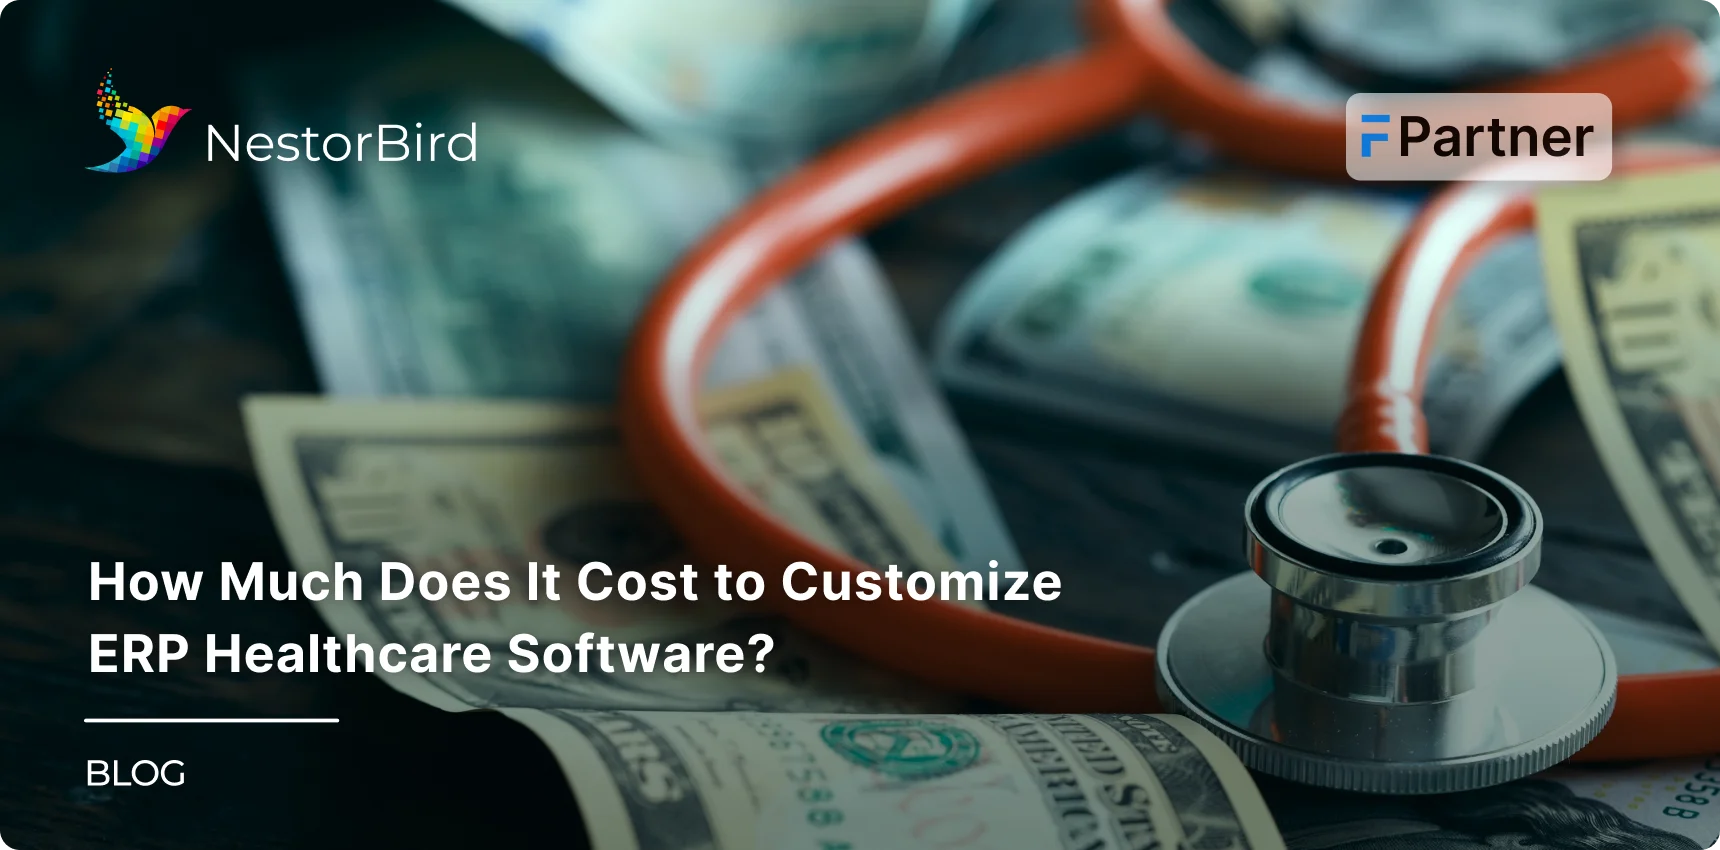 How Much Does It Cost to Customize ERP Healthcare Software?